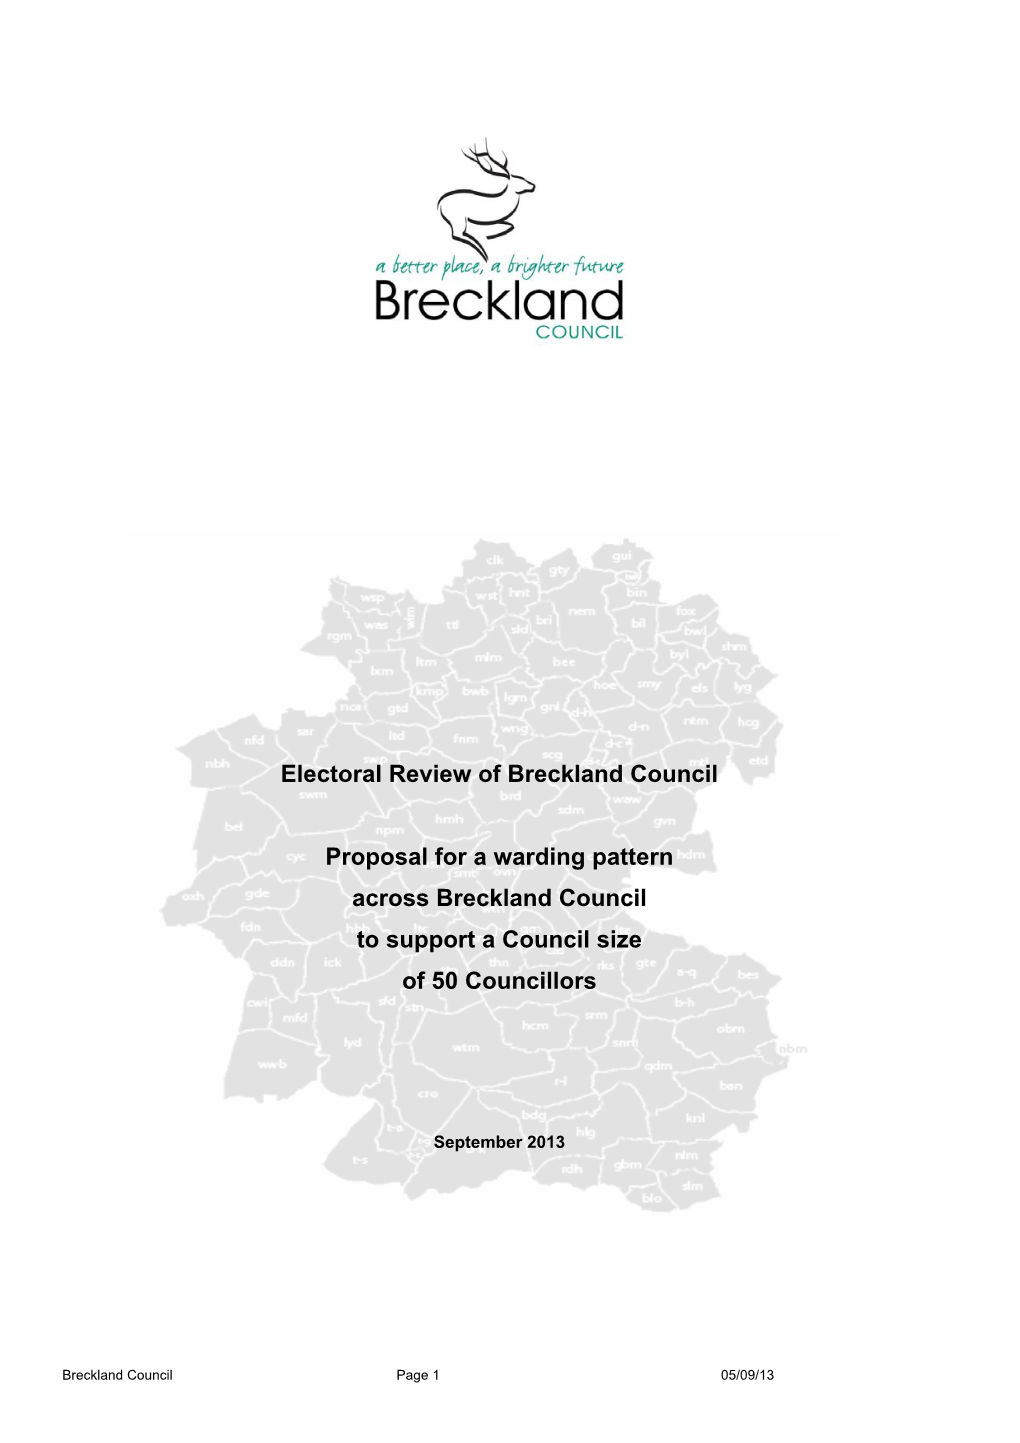 Electoral Review of Breckland Council Proposal for a Warding Pattern